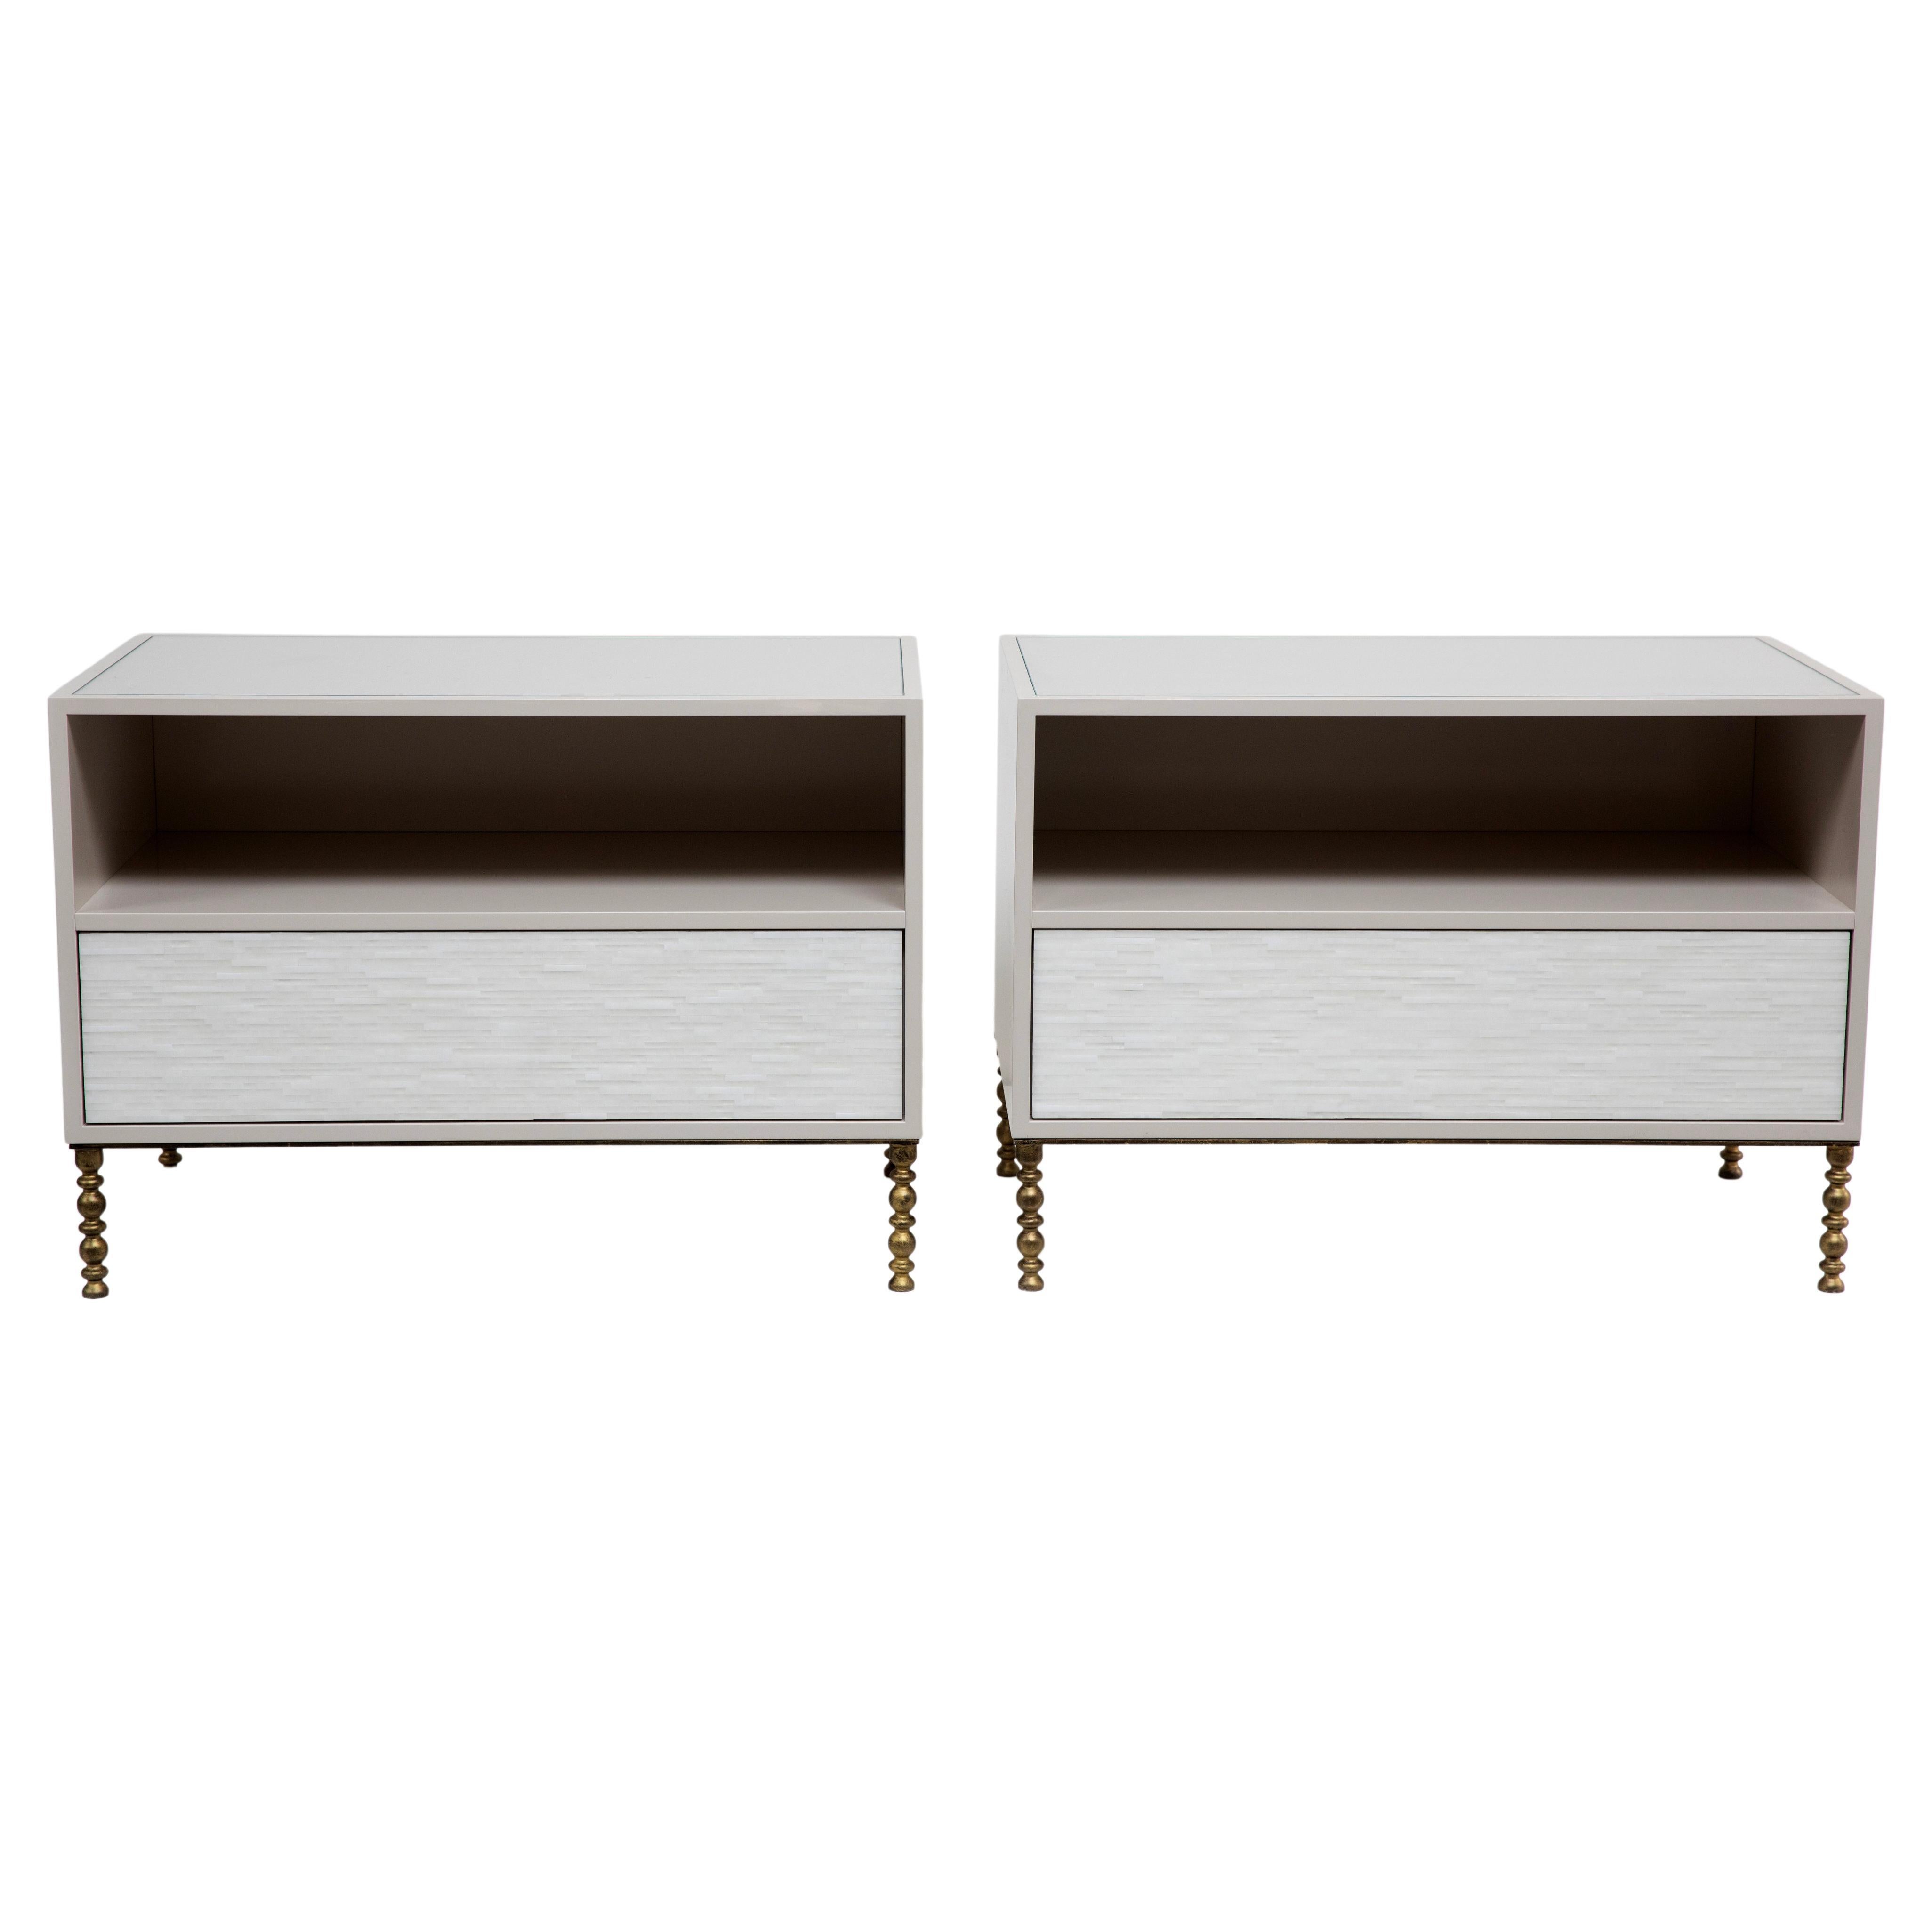 The Modern One-Drawer Mosaic Nightstands with Vintage Base feature a single touch-latch drawer with hand-cut Icy White glass stripe mosaic, an open top shelf, an inset glass top, Misty Grey Lacquer finish, and a gilded vintage style metal base.